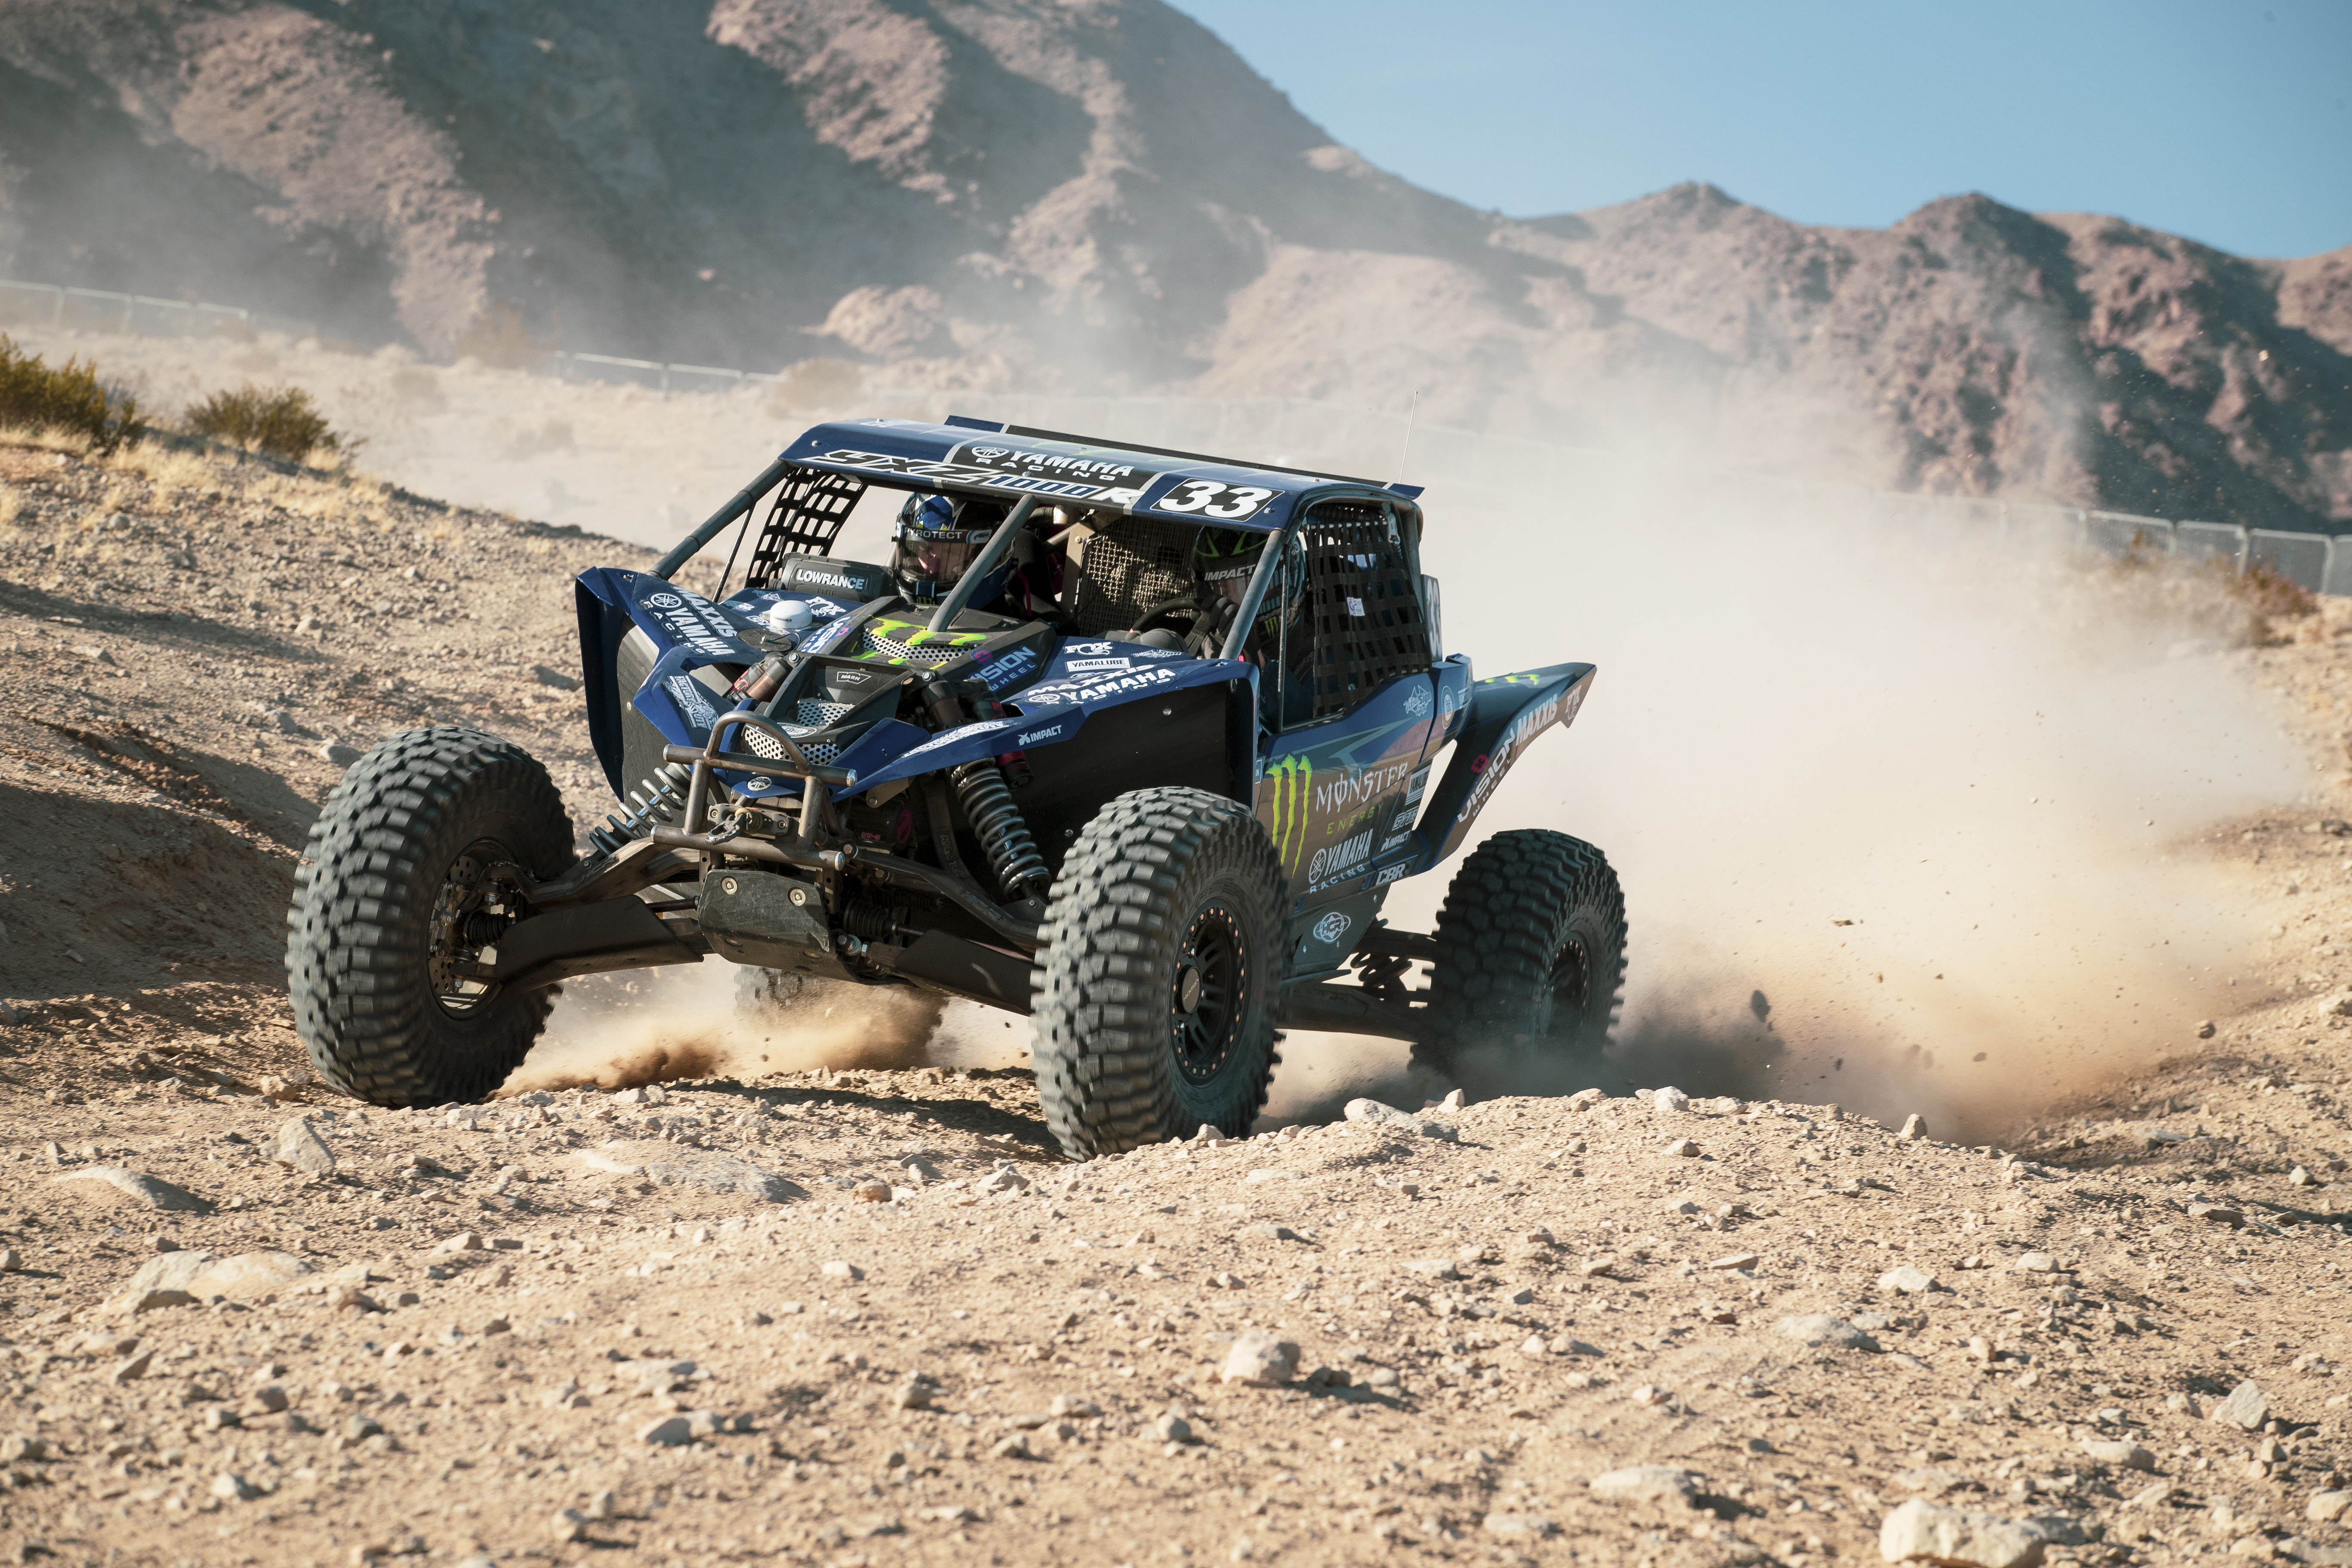 CJ Greaves King of Hammers 2020